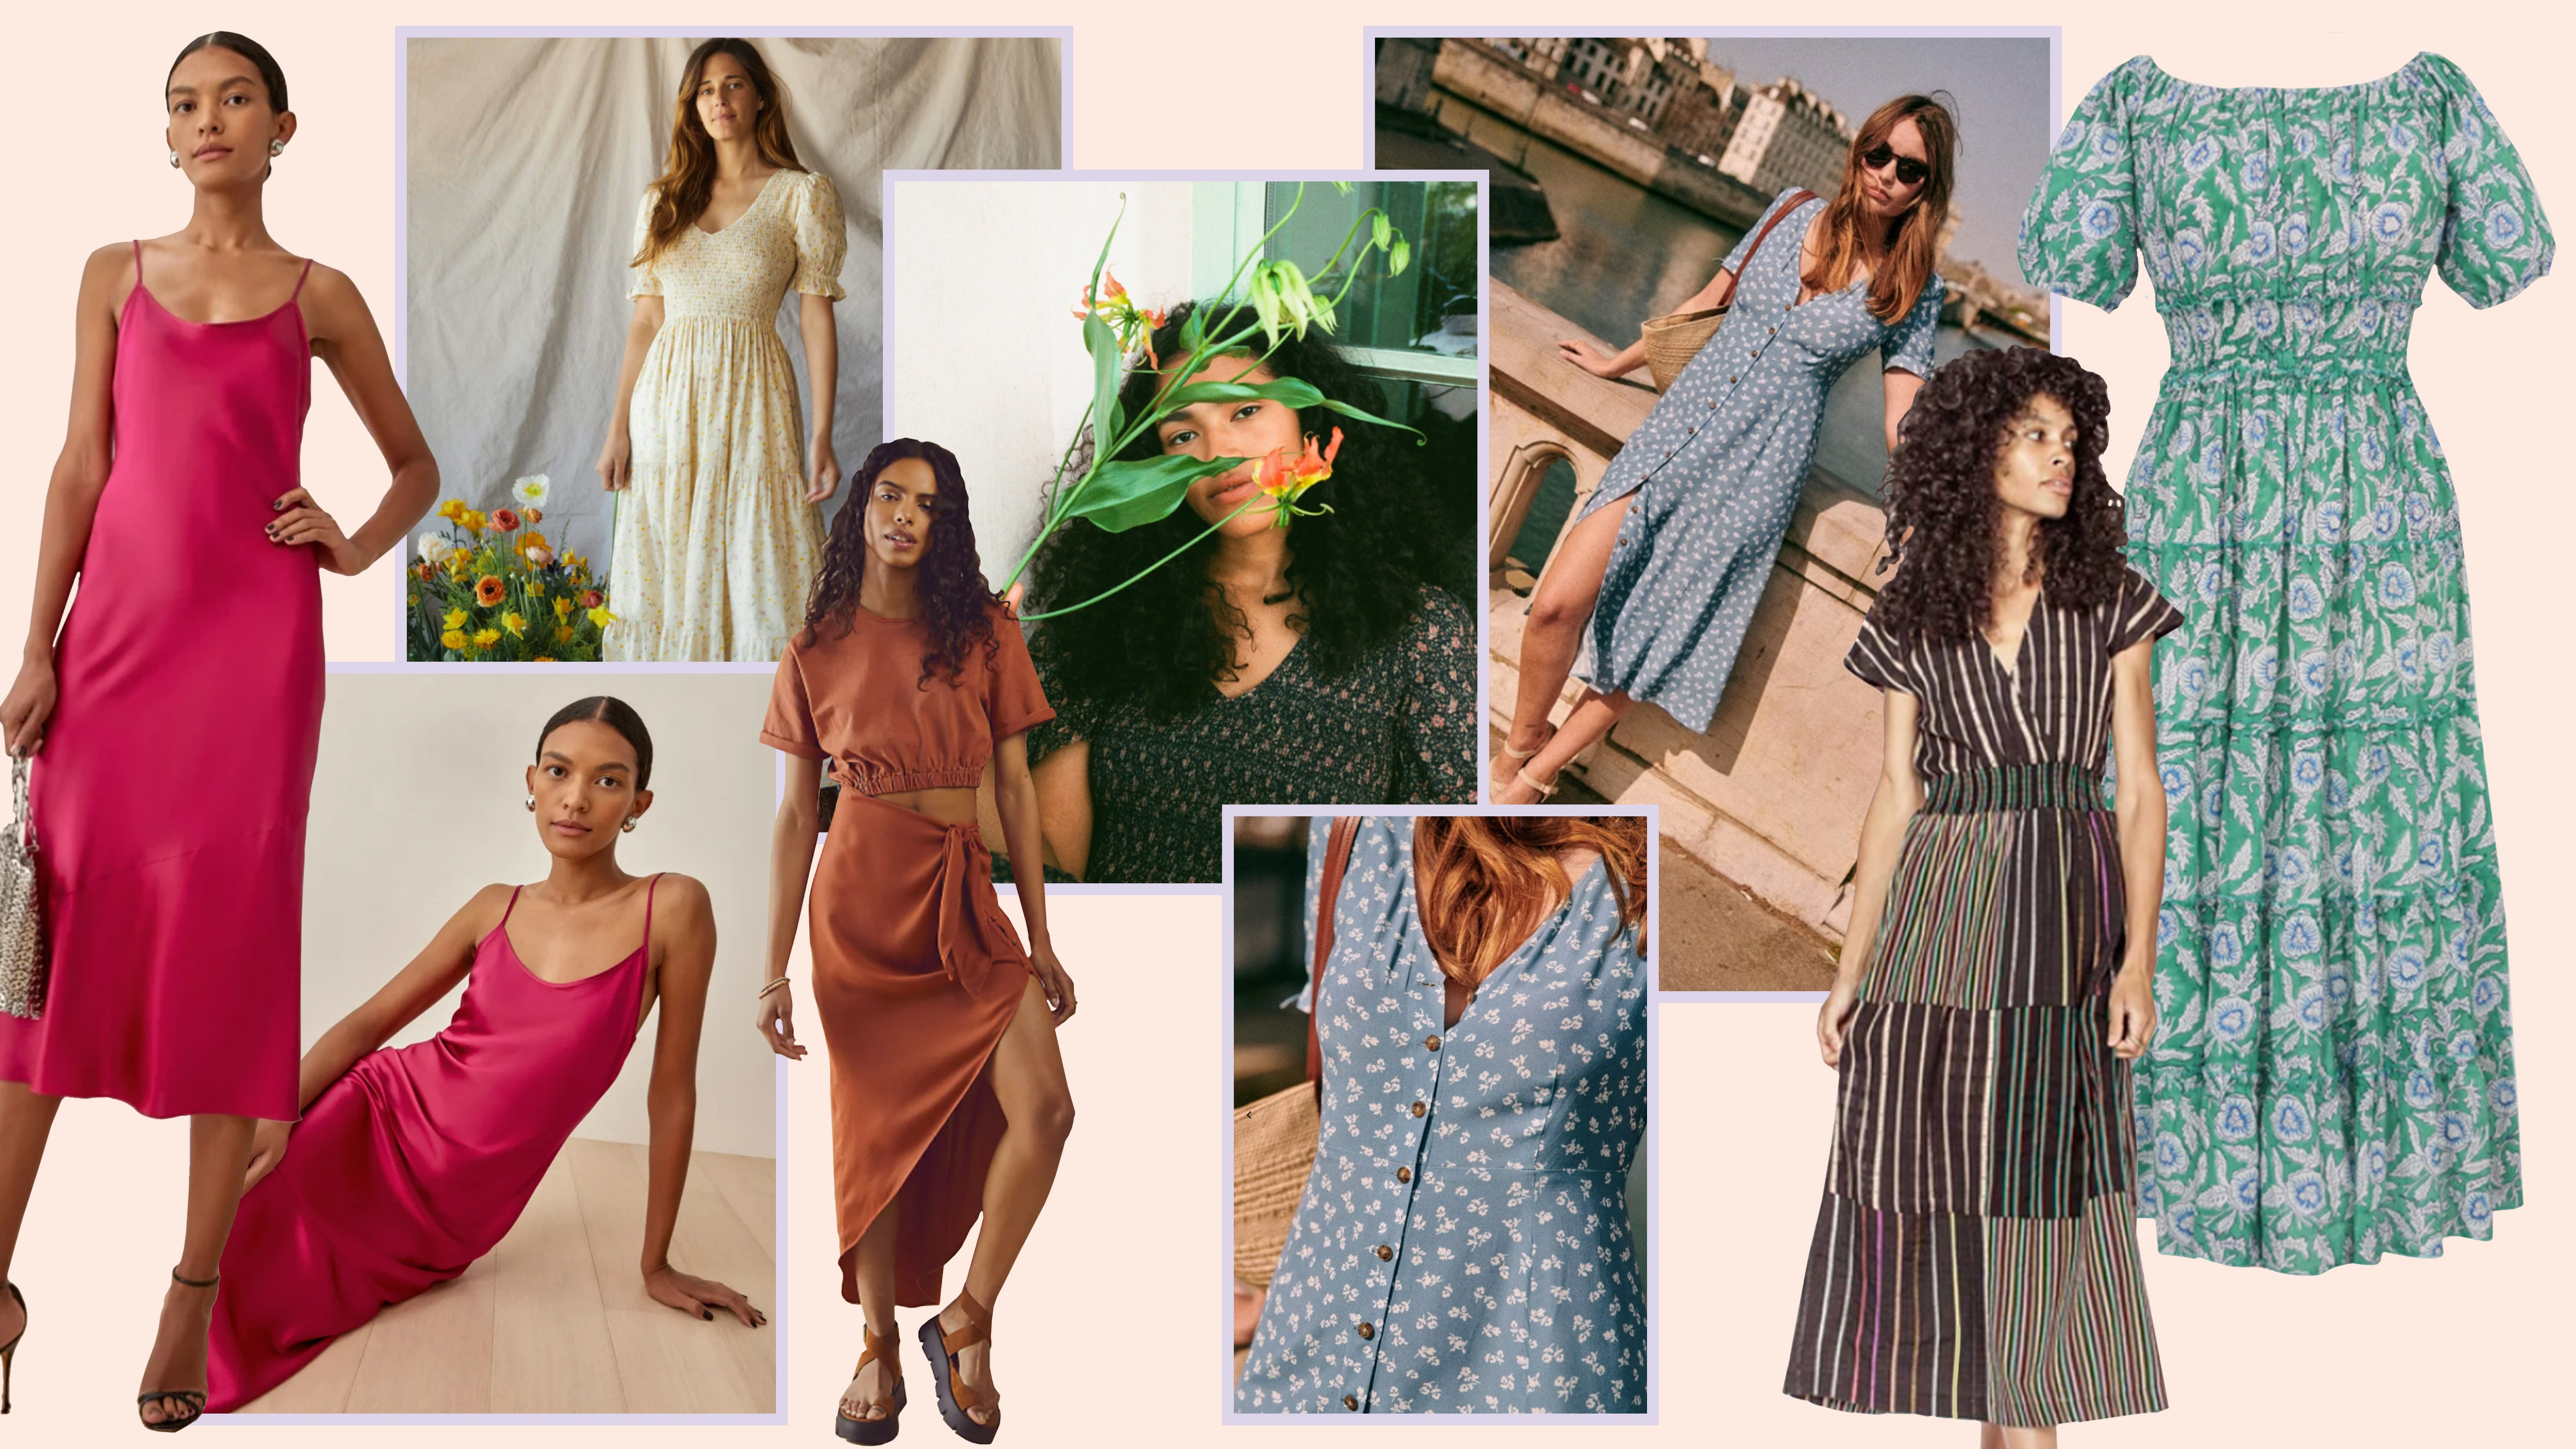 In our Closets - The Team’s 10 Favorite Summer Dresses